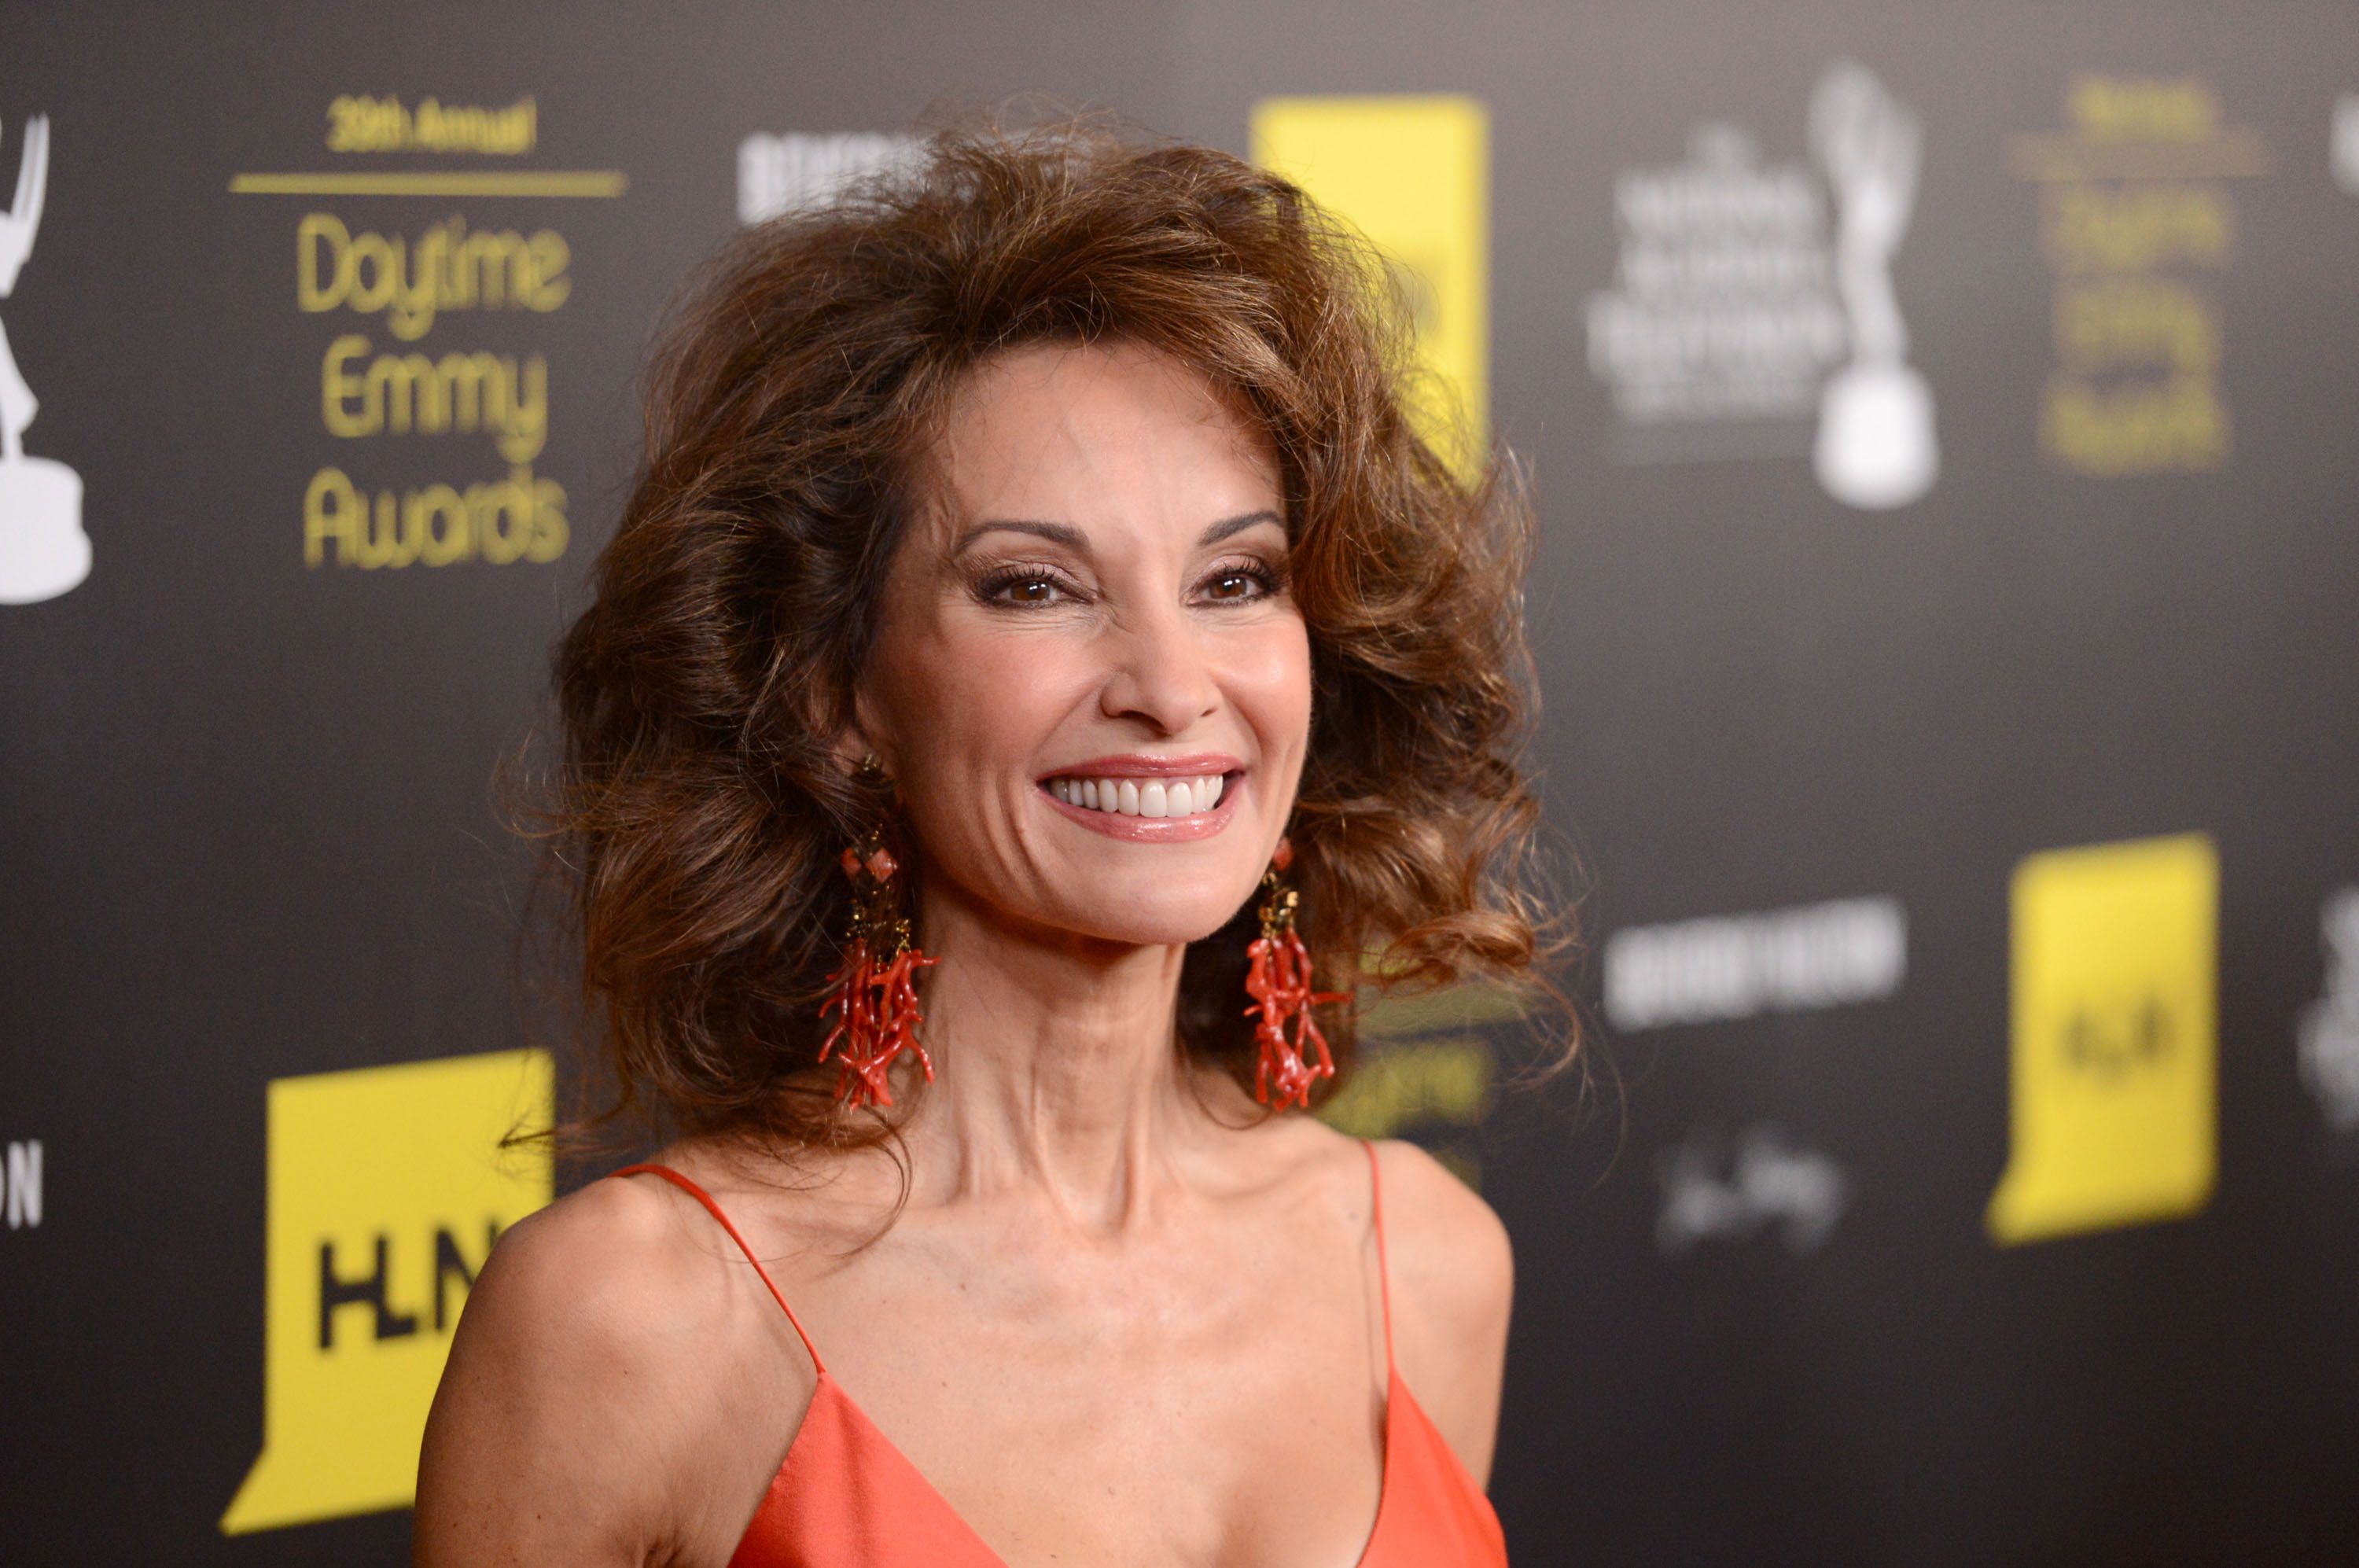 Susan Lucci arrives at The 39th Annual Daytime Emmy Awards broadcasted on HLN held at The Beverly Hilton Hotel on June 23, 2012 in Beverly Hills, California. | Source: Getty Images